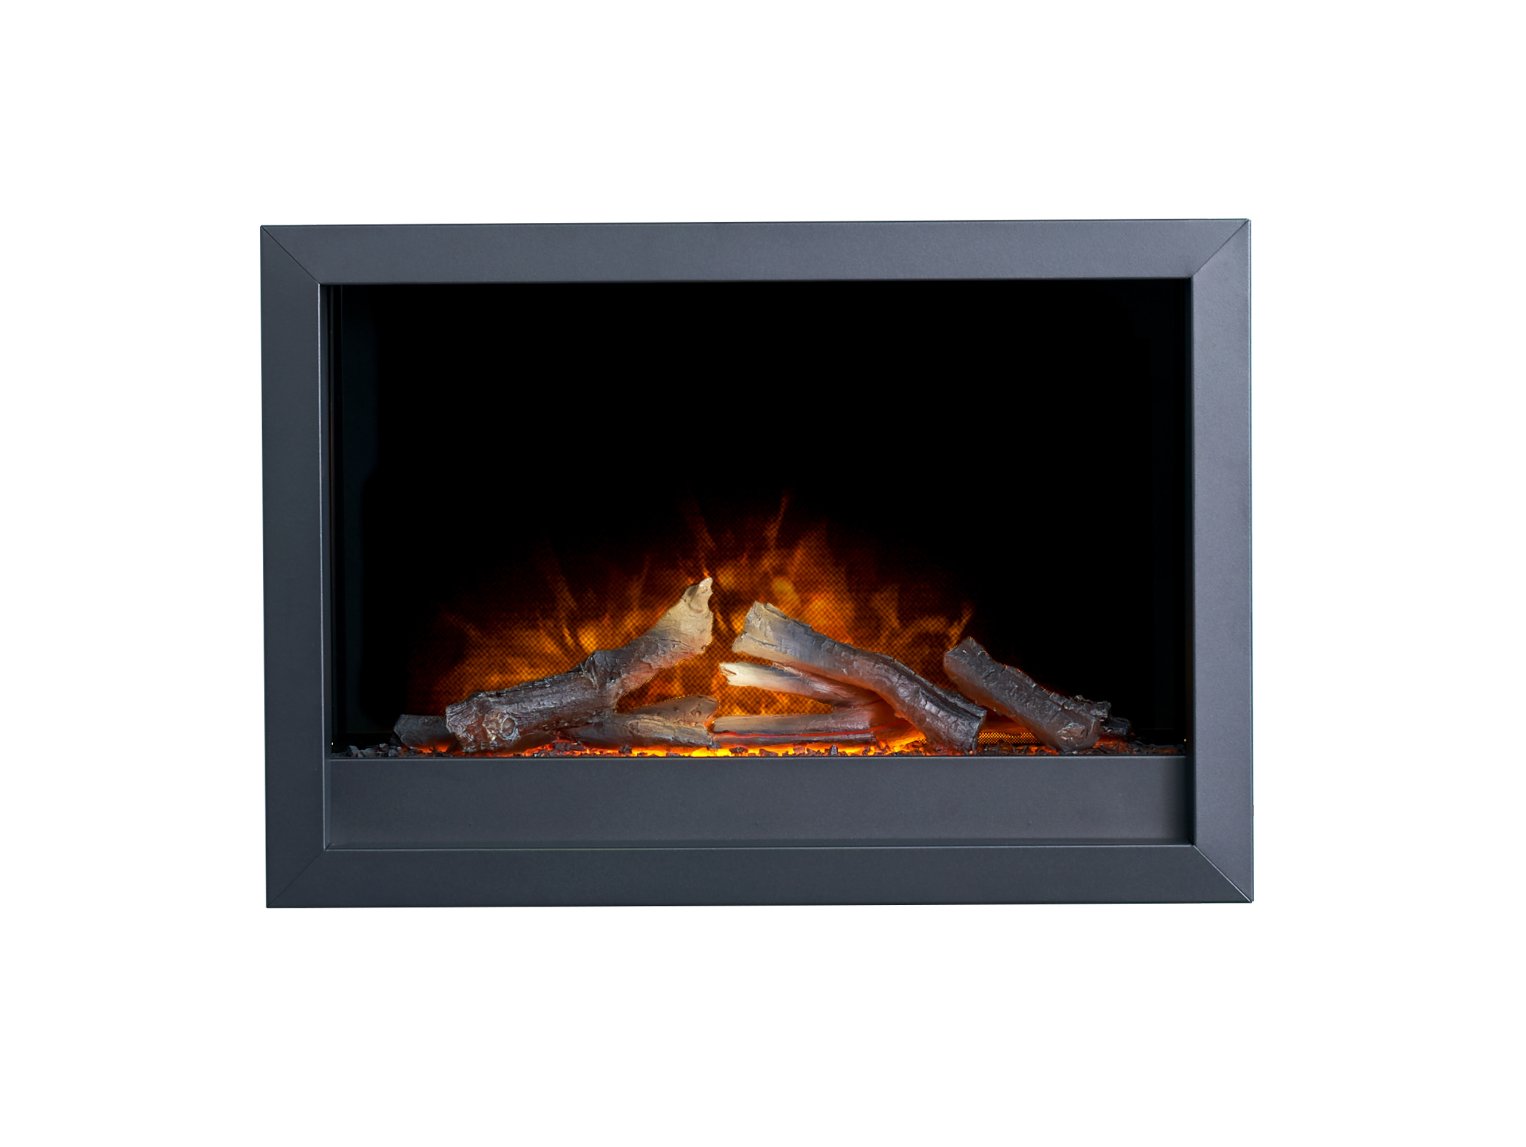 Adam Toronto Electric Wall Inset Fire with Logs & Remote Control in Black